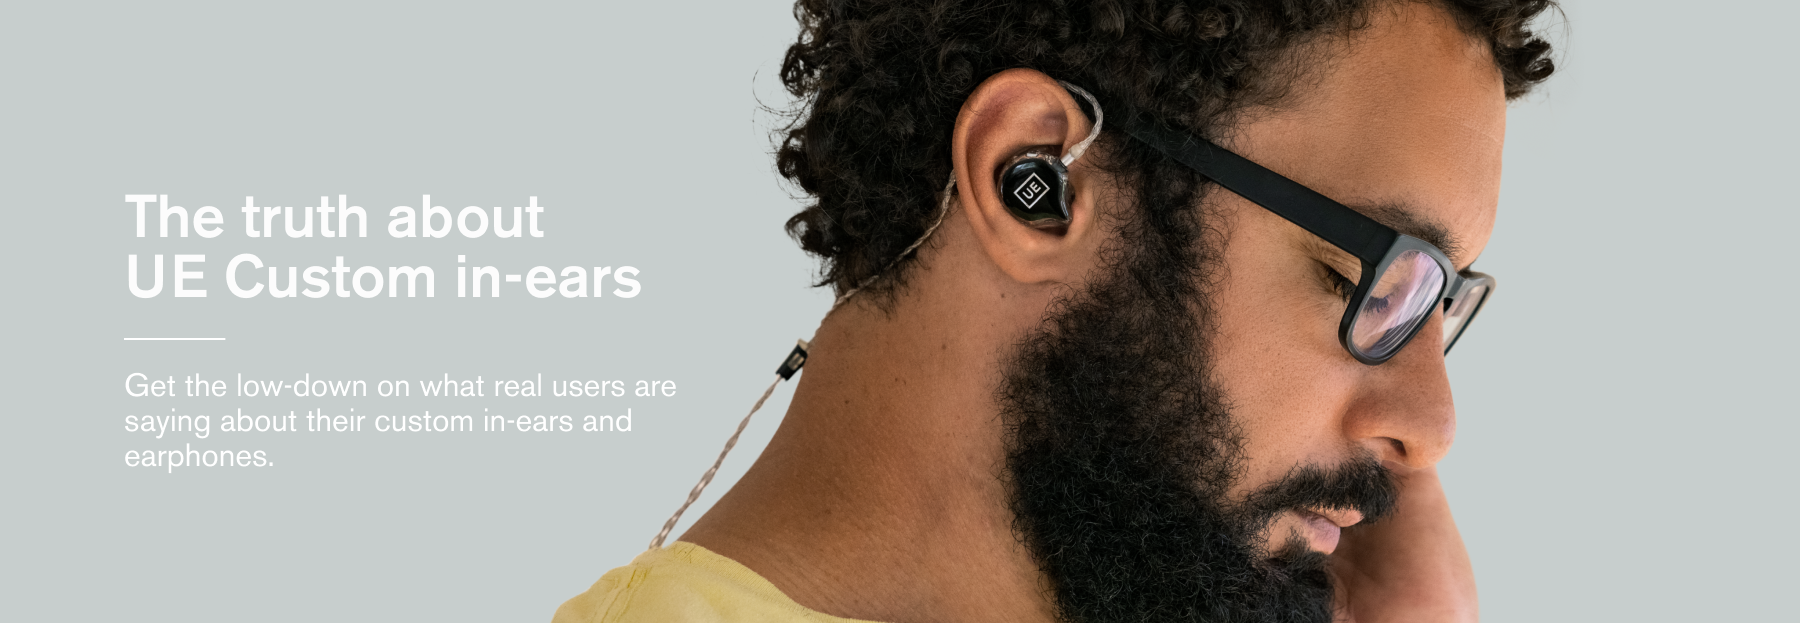 UE Customs Reviews: The Truth About Our In-Ears